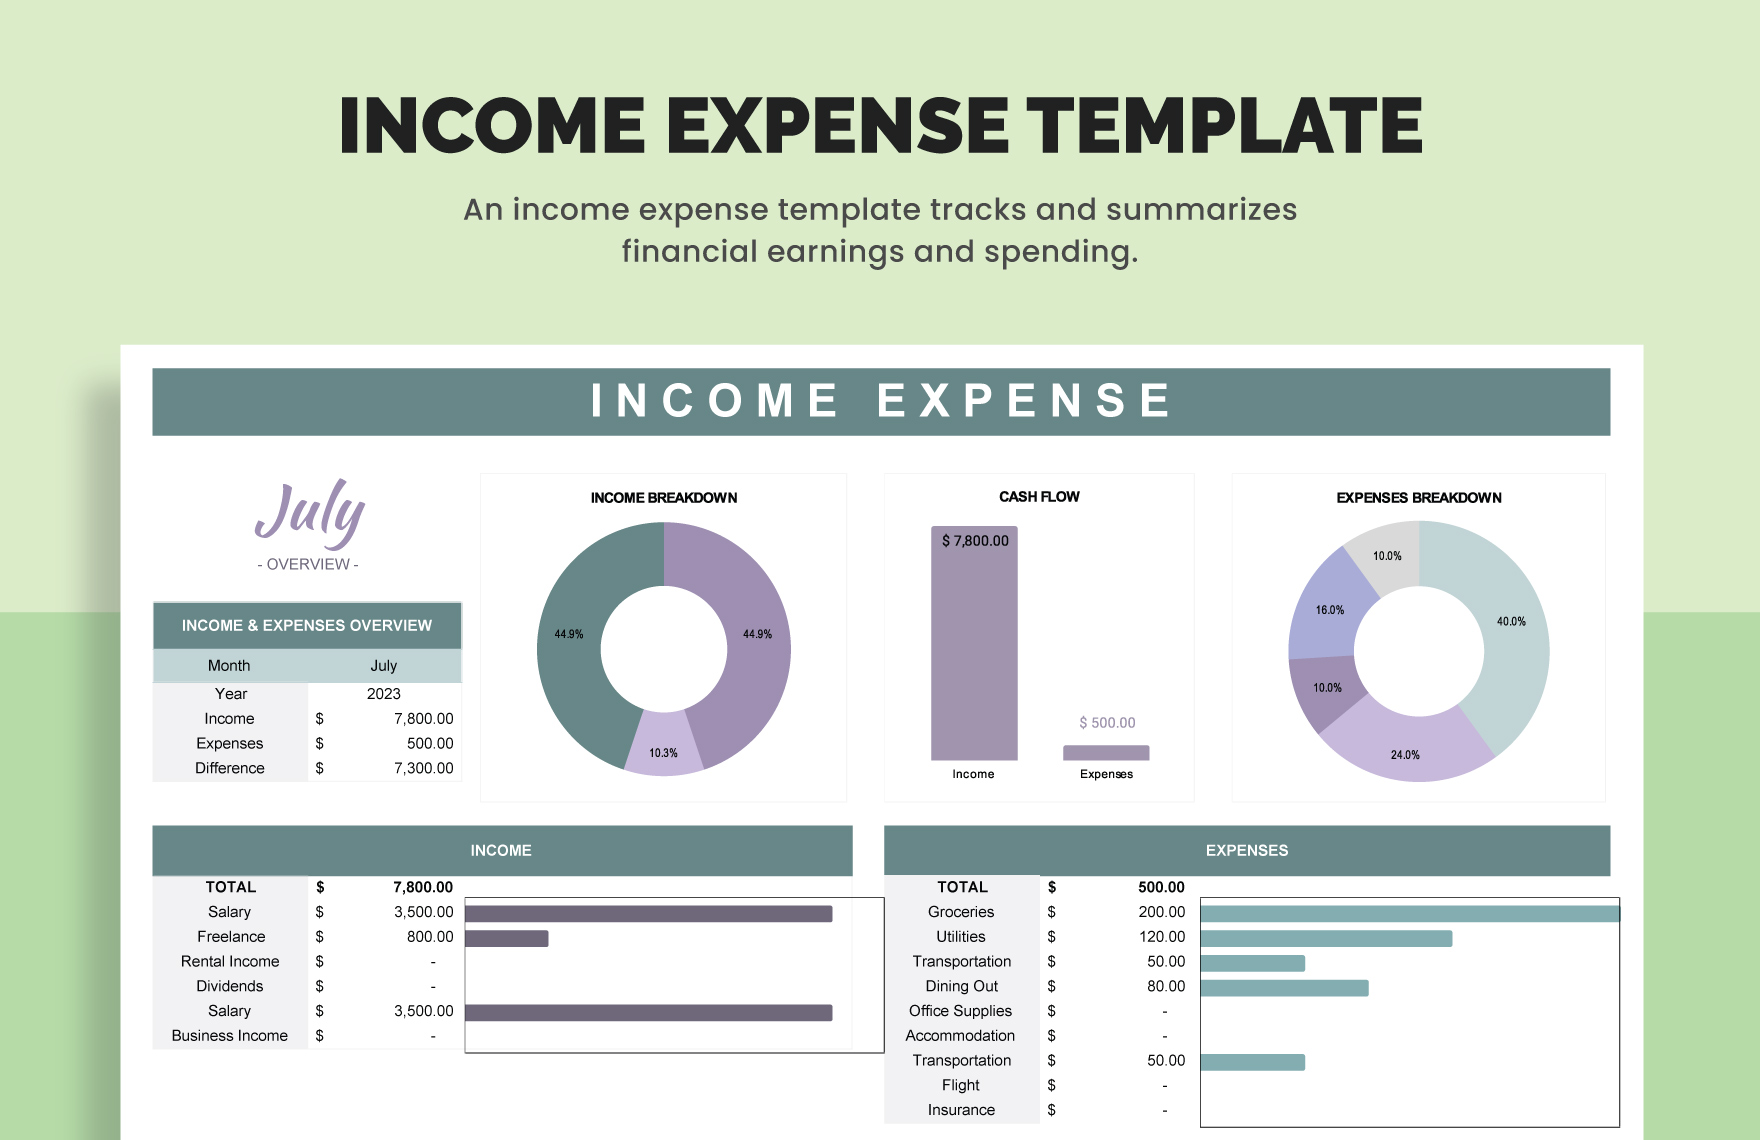 Income Expense template